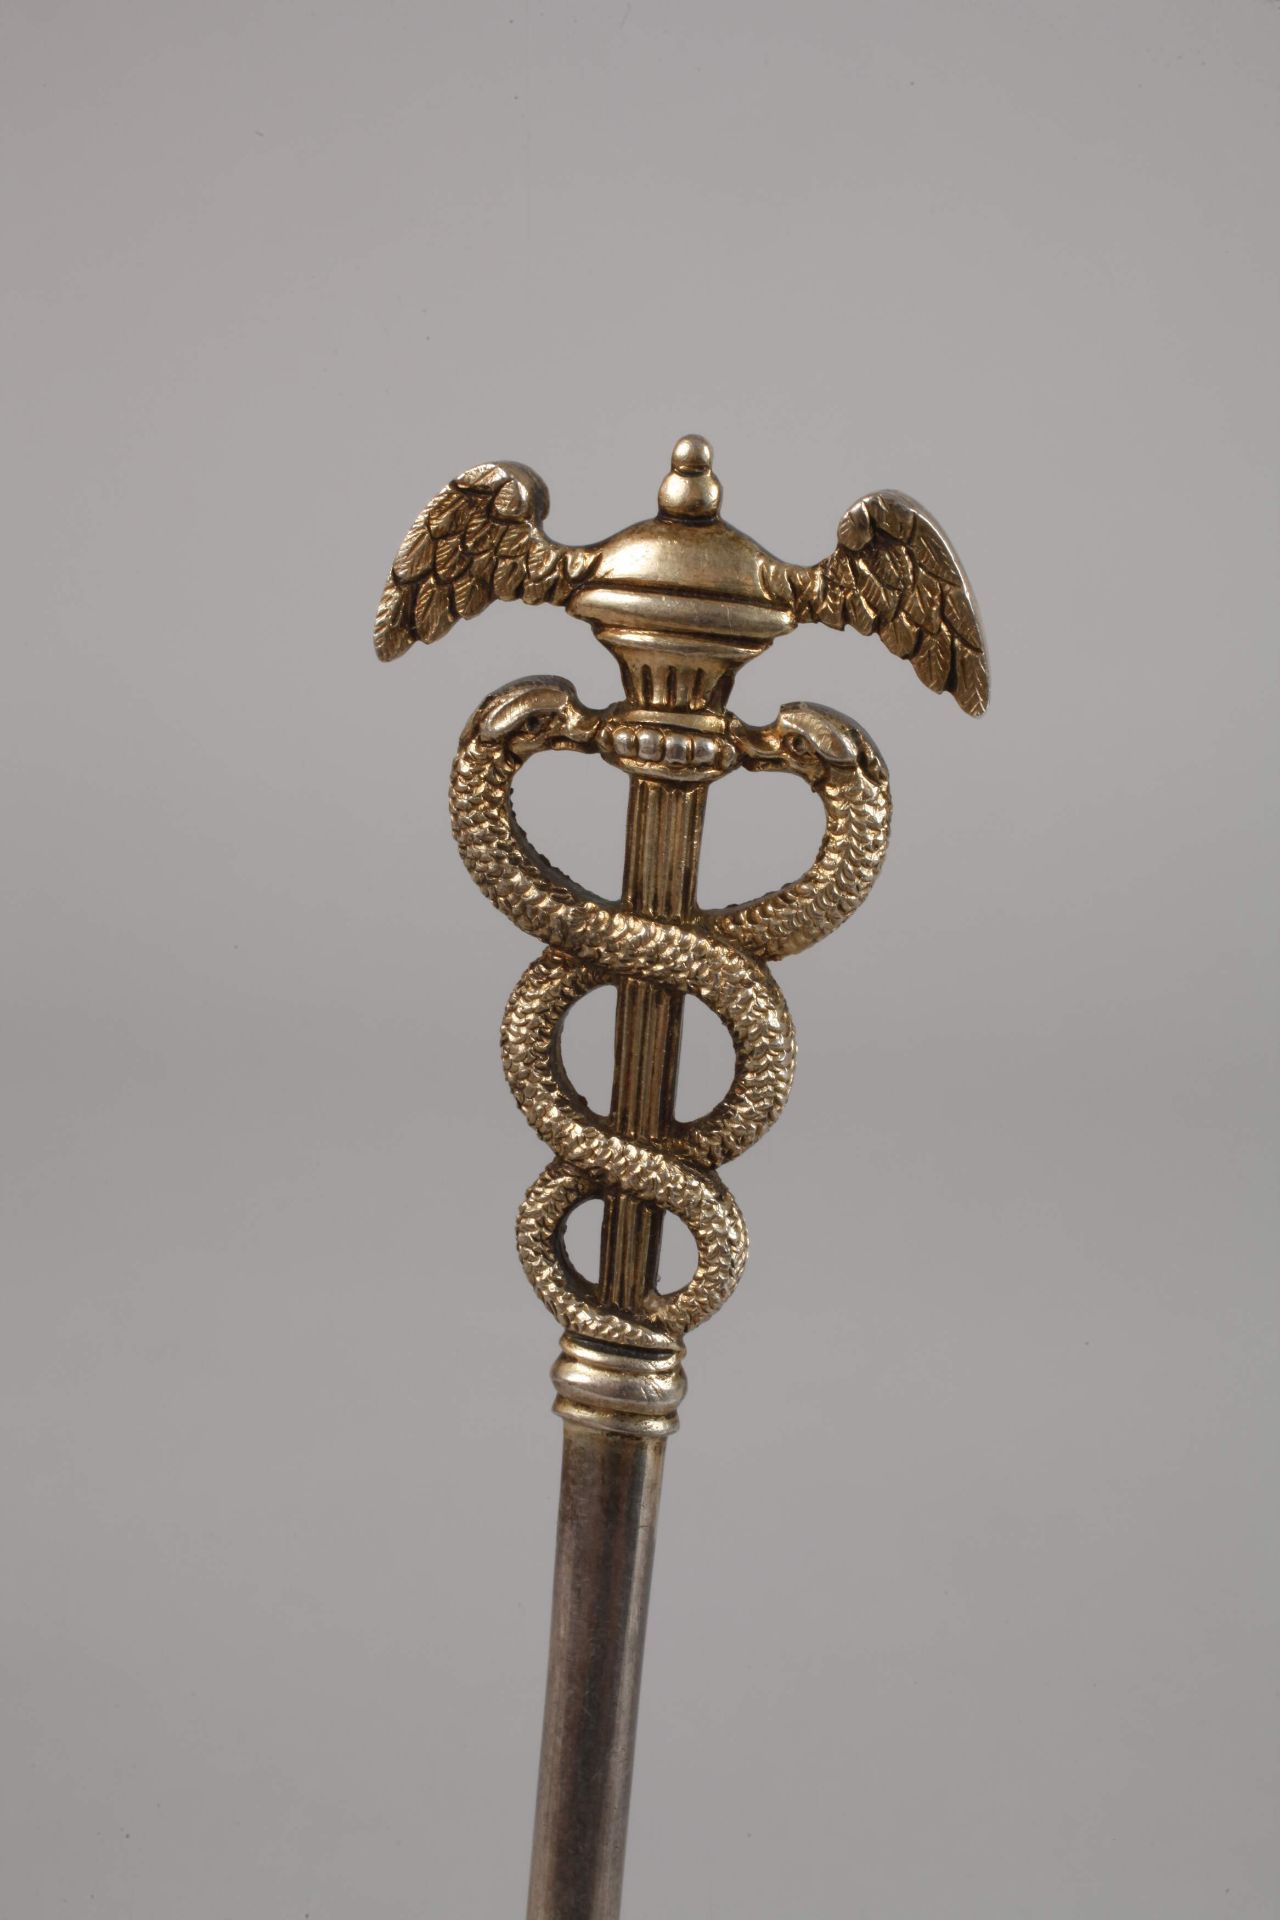 Spoon Aesculapius England - Image 2 of 3